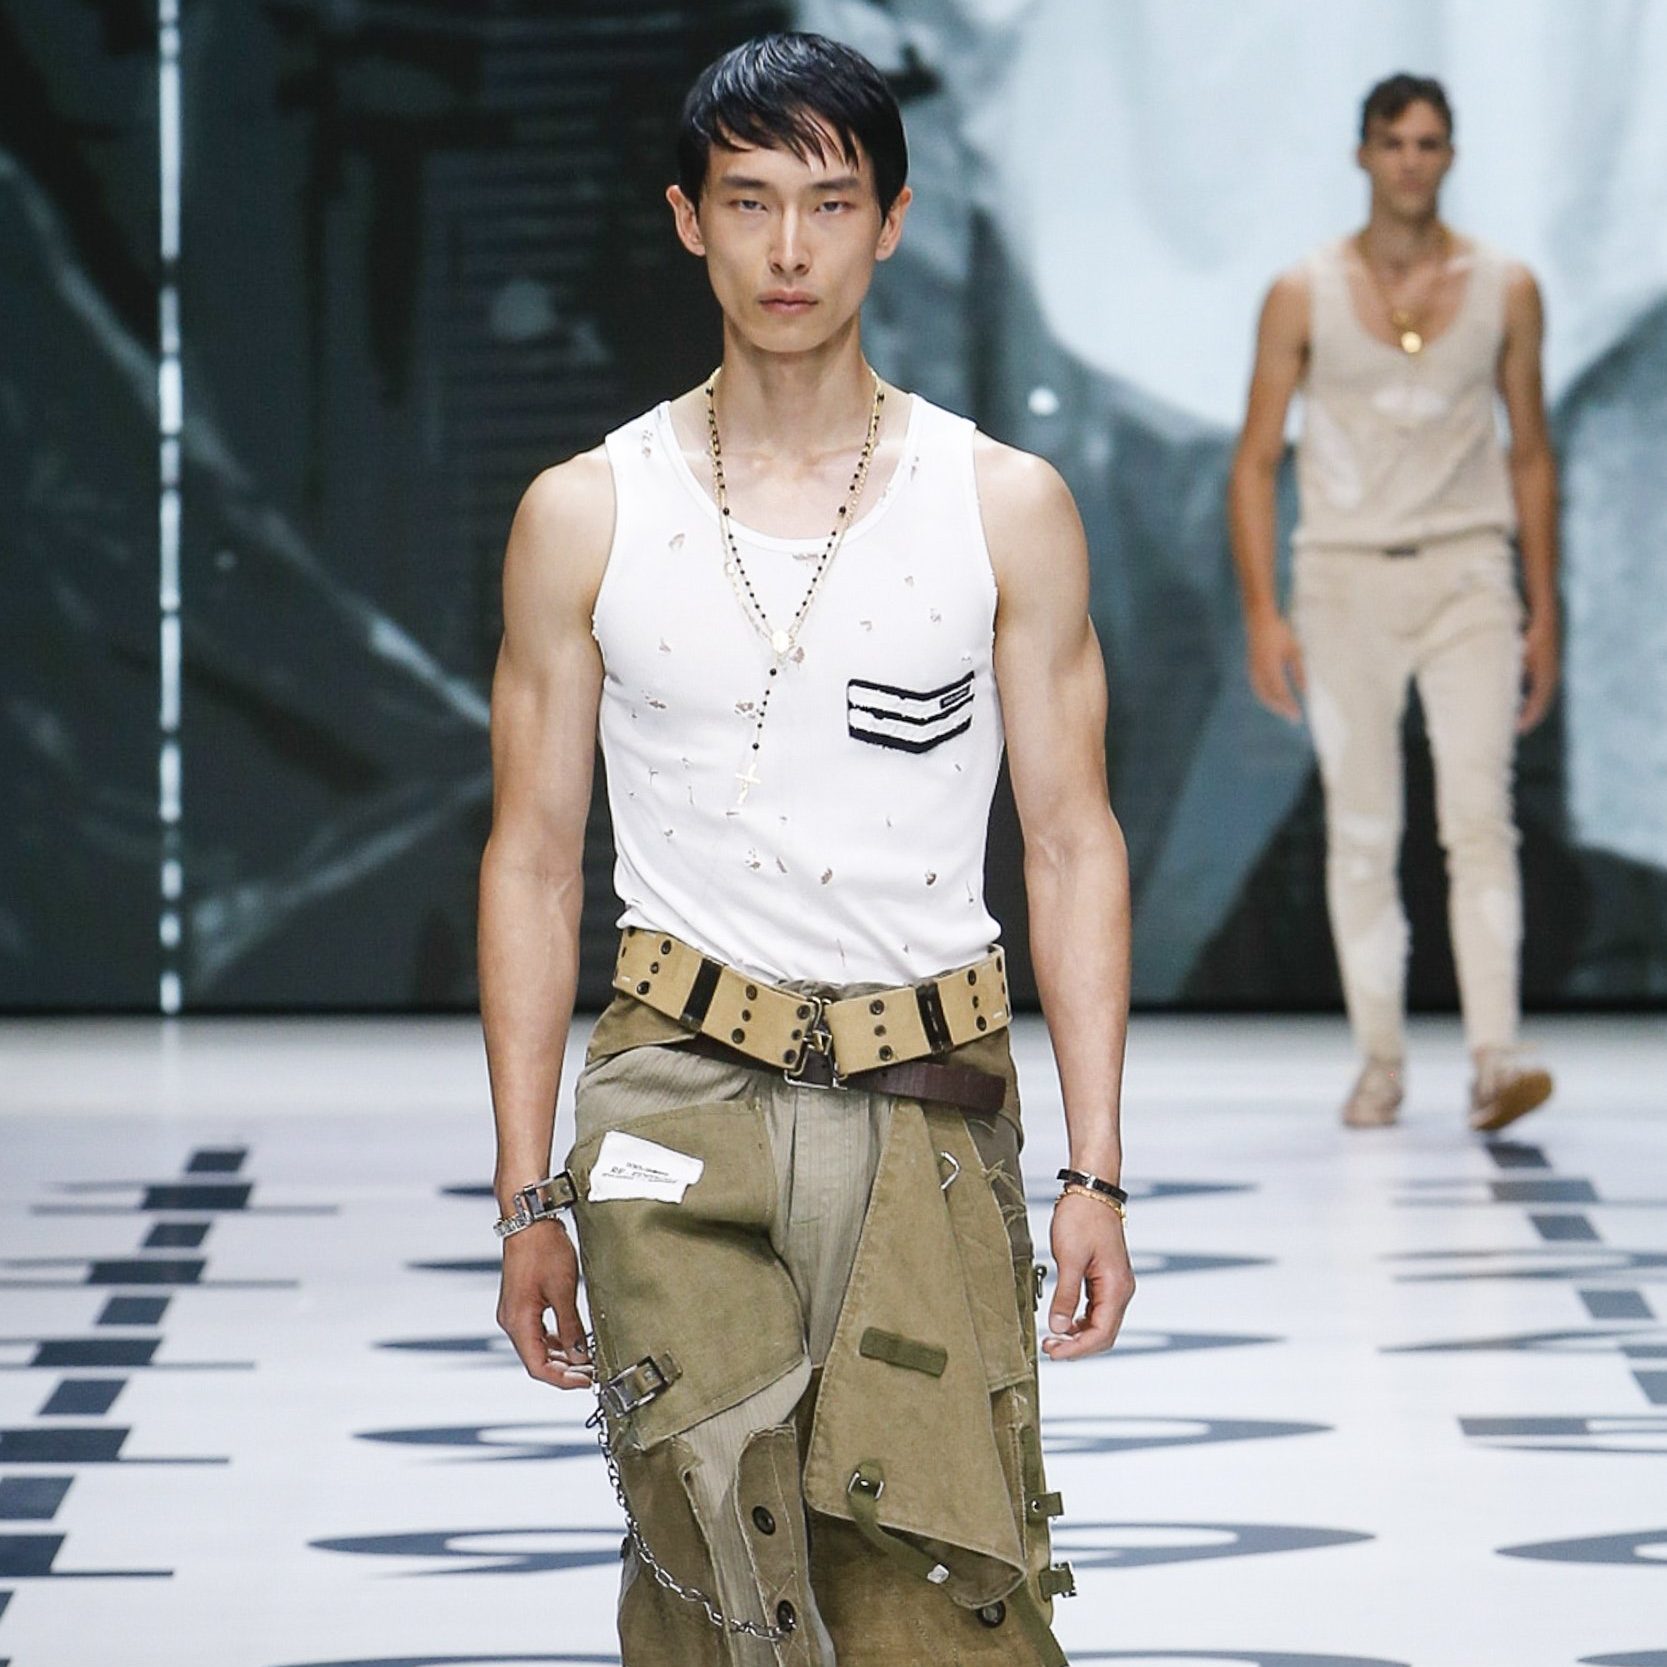 Cargo Pants Are In Your Fashion Future